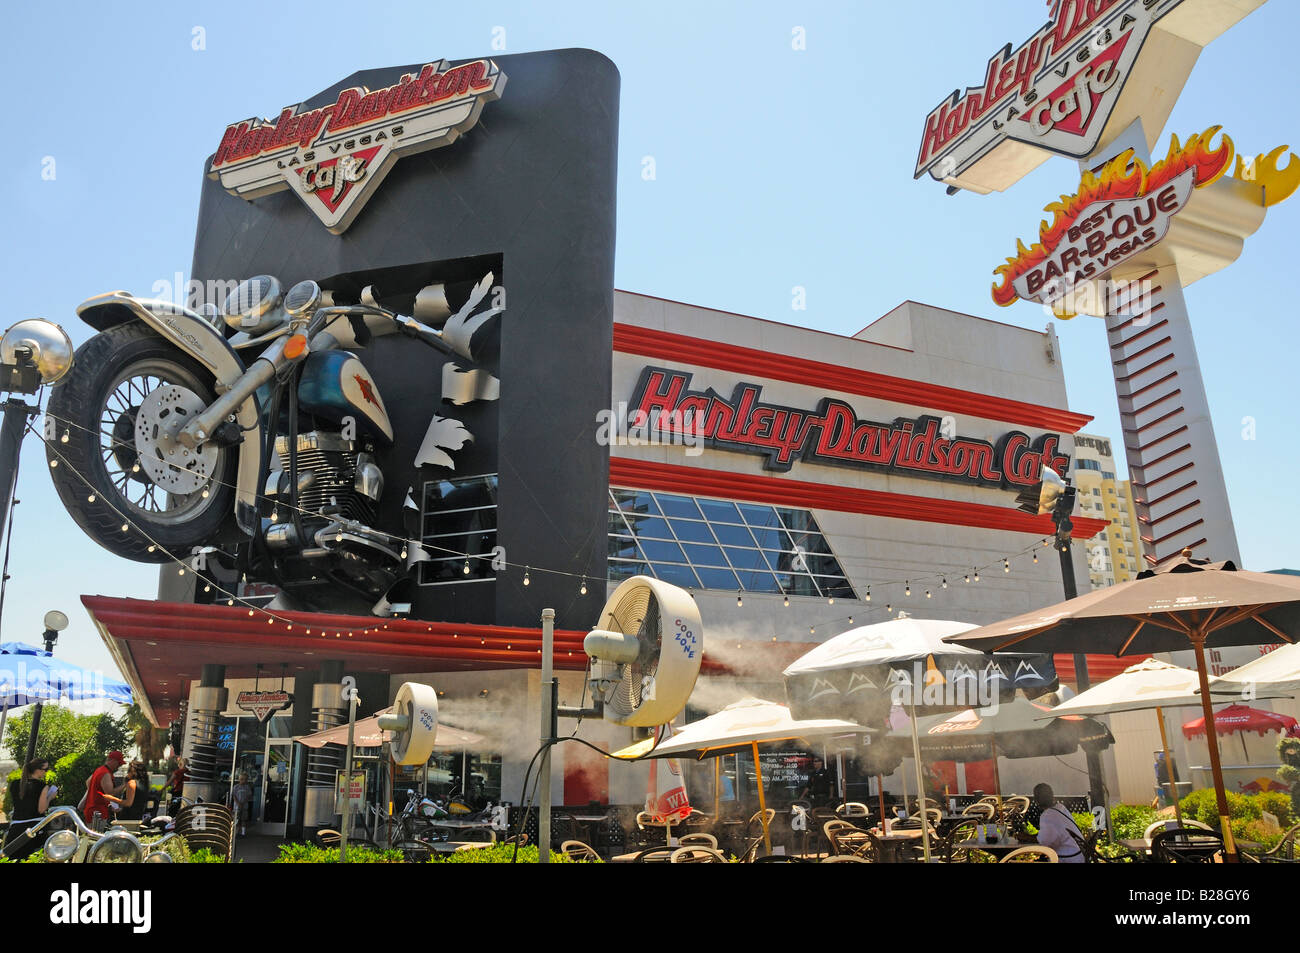 Harley Davidson Motorcycle Casino and Cafe in Las Vegas USA Stock Photo -  Alamy